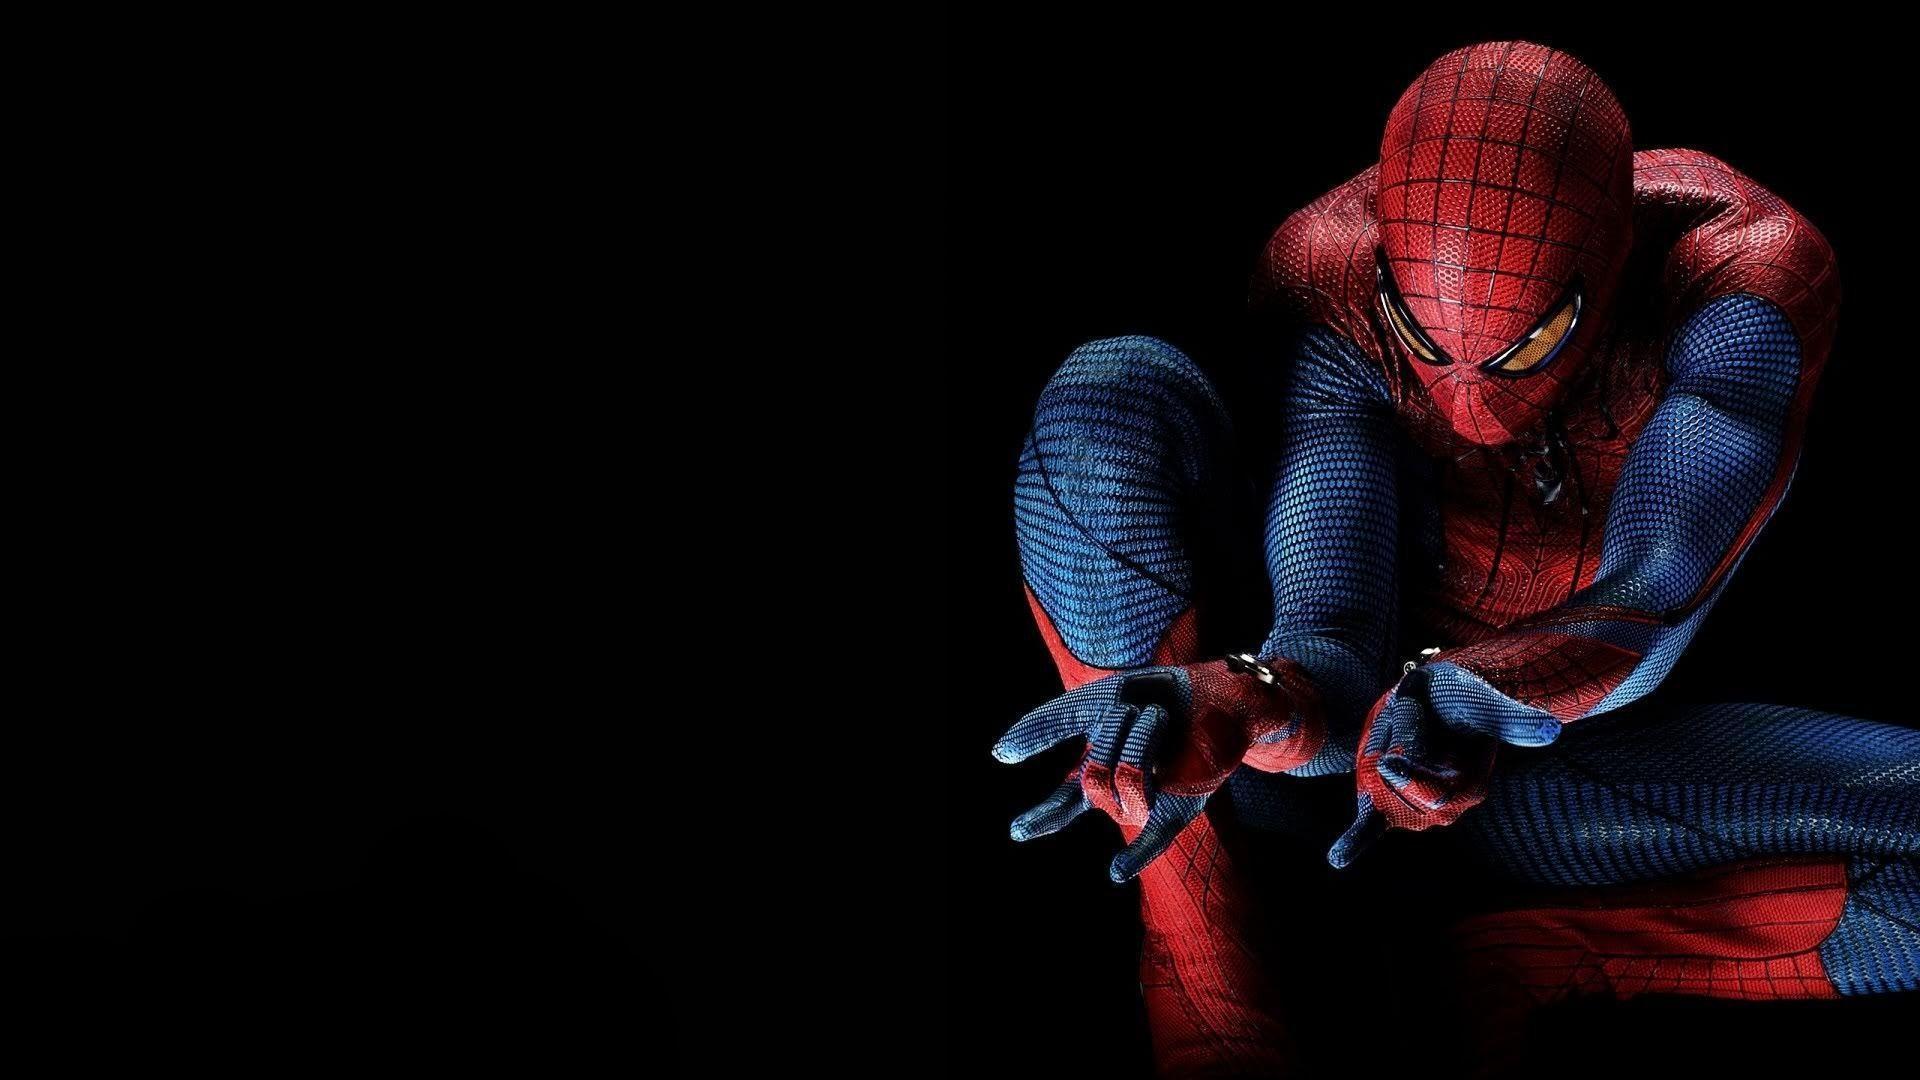 Spiderman Black Background For Computer Widescreen